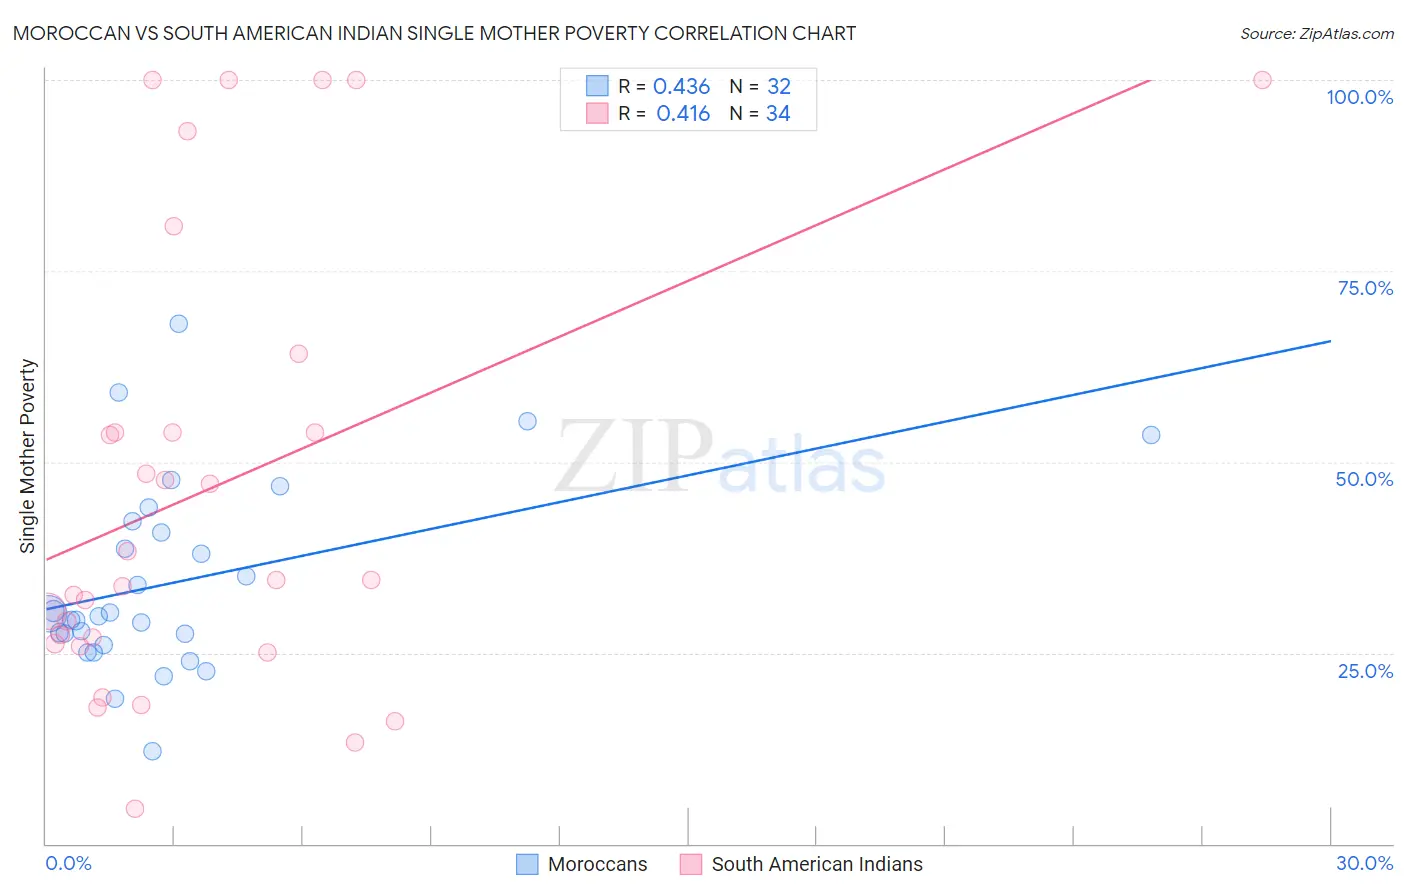 Moroccan vs South American Indian Single Mother Poverty